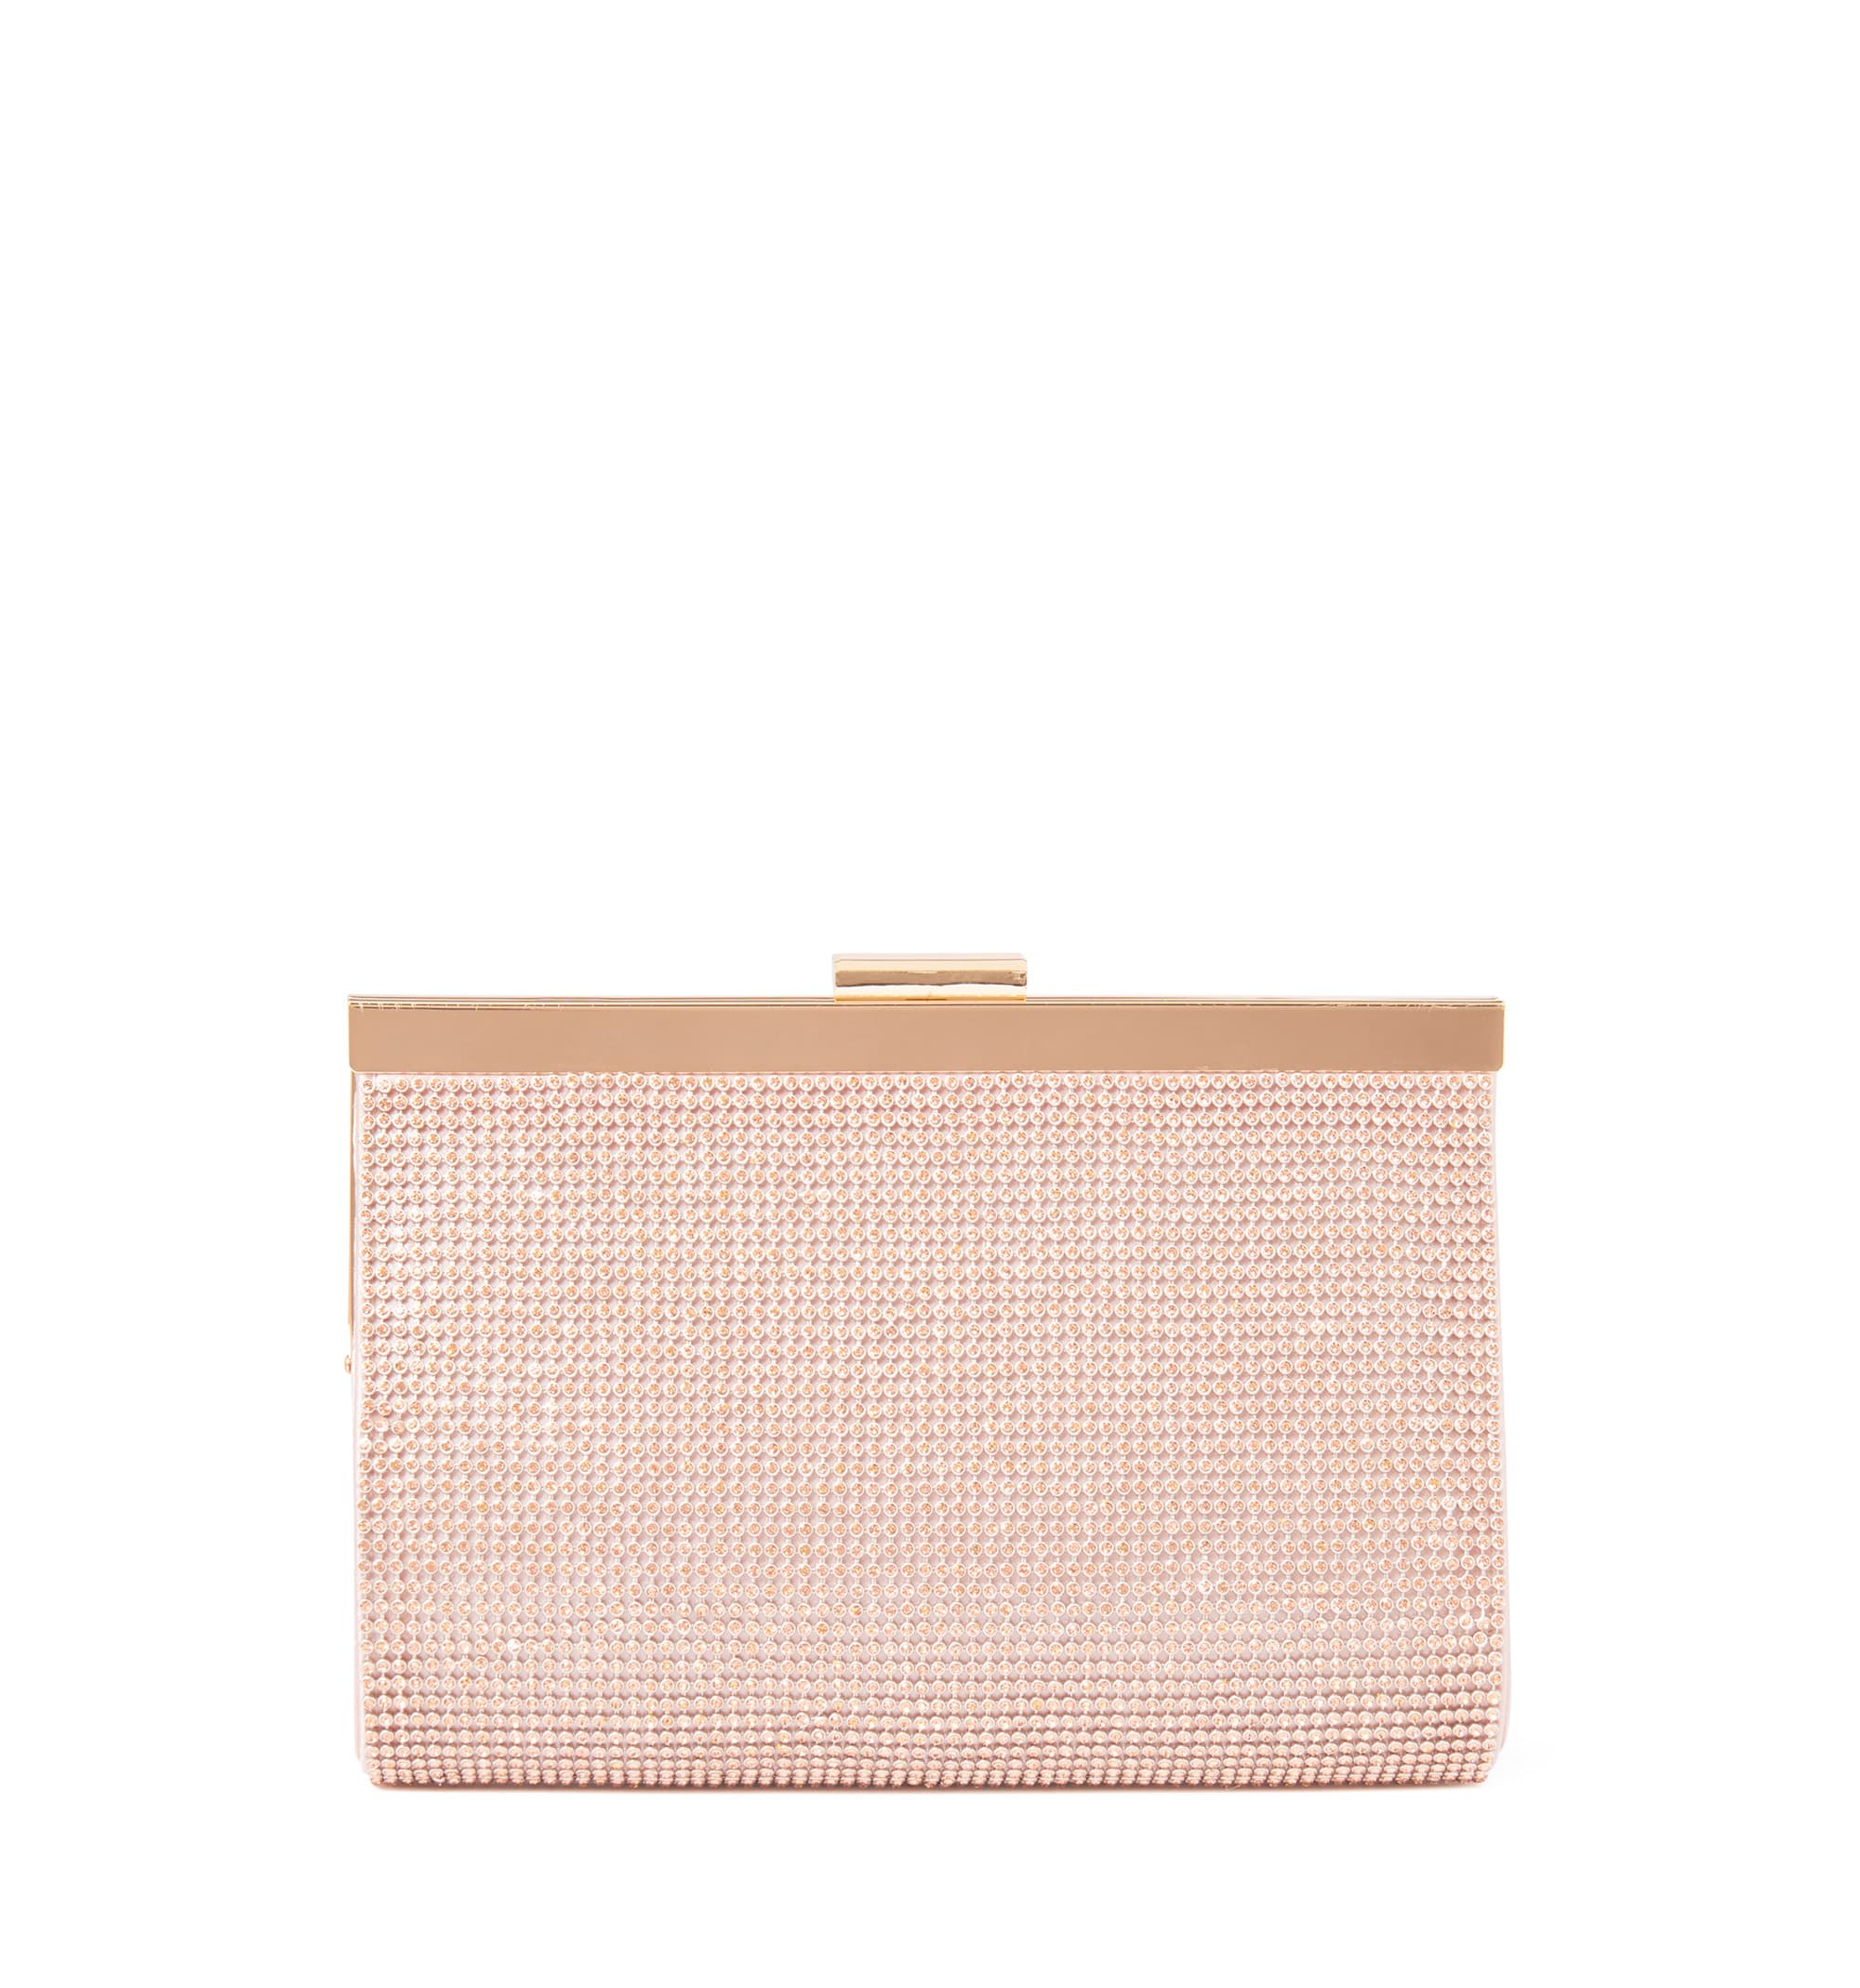 Buy Forever New Whiteley Phone Purse Online